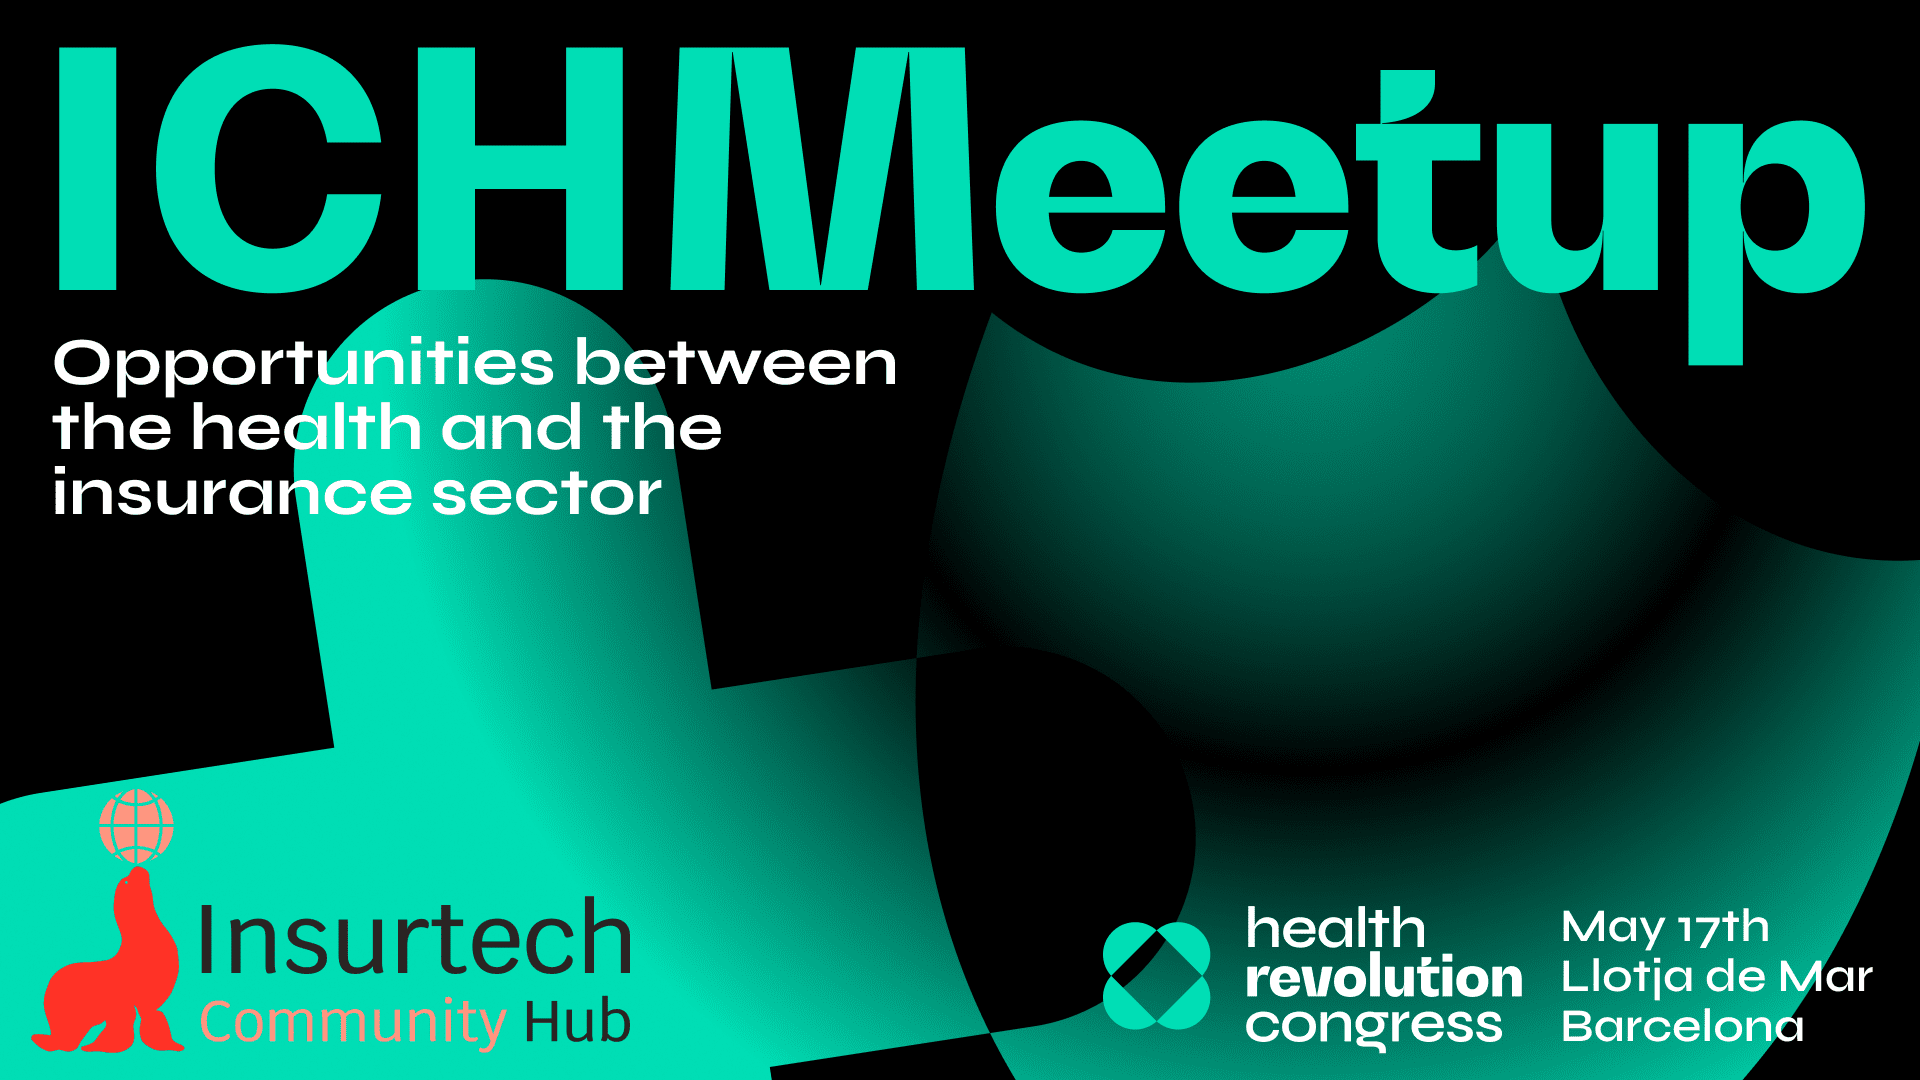 Health & Insurance team up at the ICHMeetup at the Health Revolution Congress